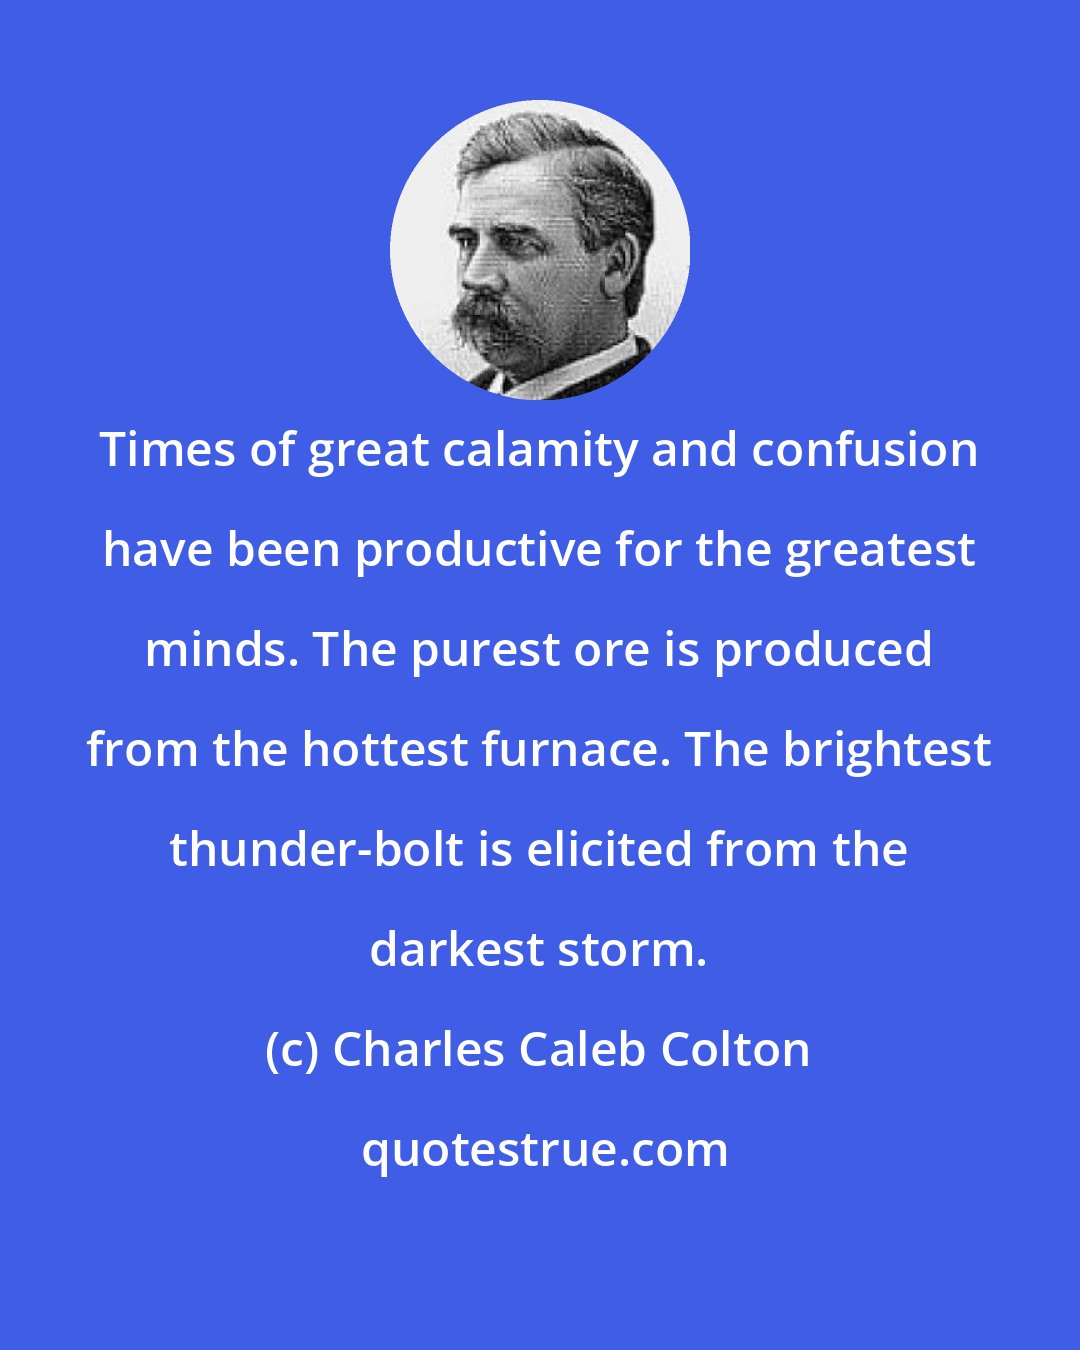 Charles Caleb Colton: Times of great calamity and confusion have been productive for the greatest minds. The purest ore is produced from the hottest furnace. The brightest thunder-bolt is elicited from the darkest storm.